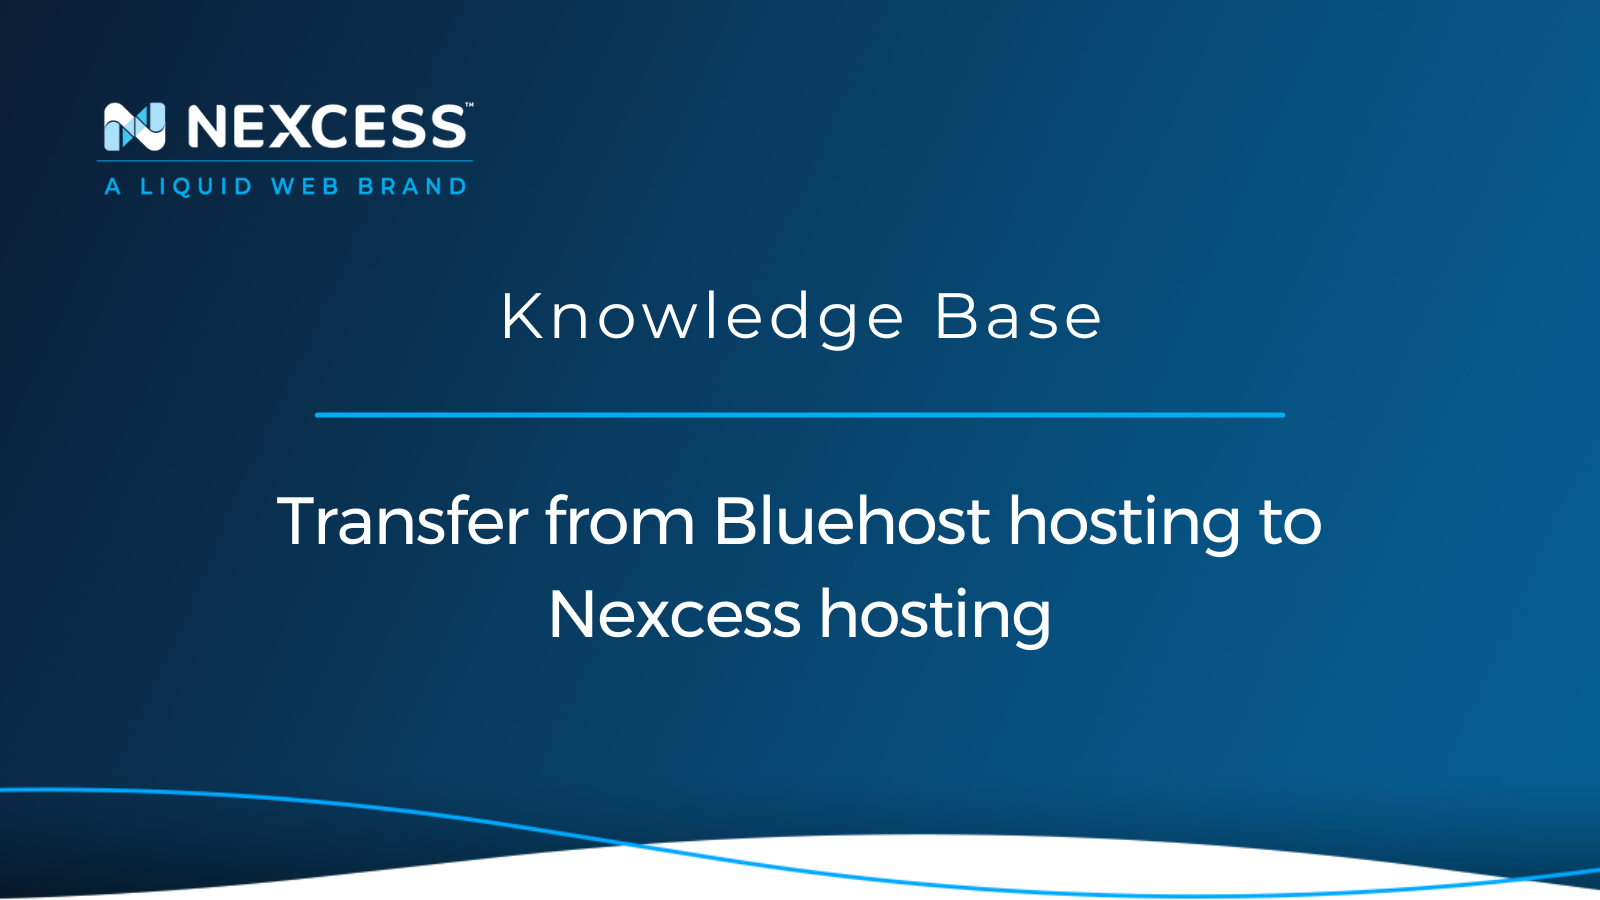 Transfer from Bluehost hosting to Nexcess hosting